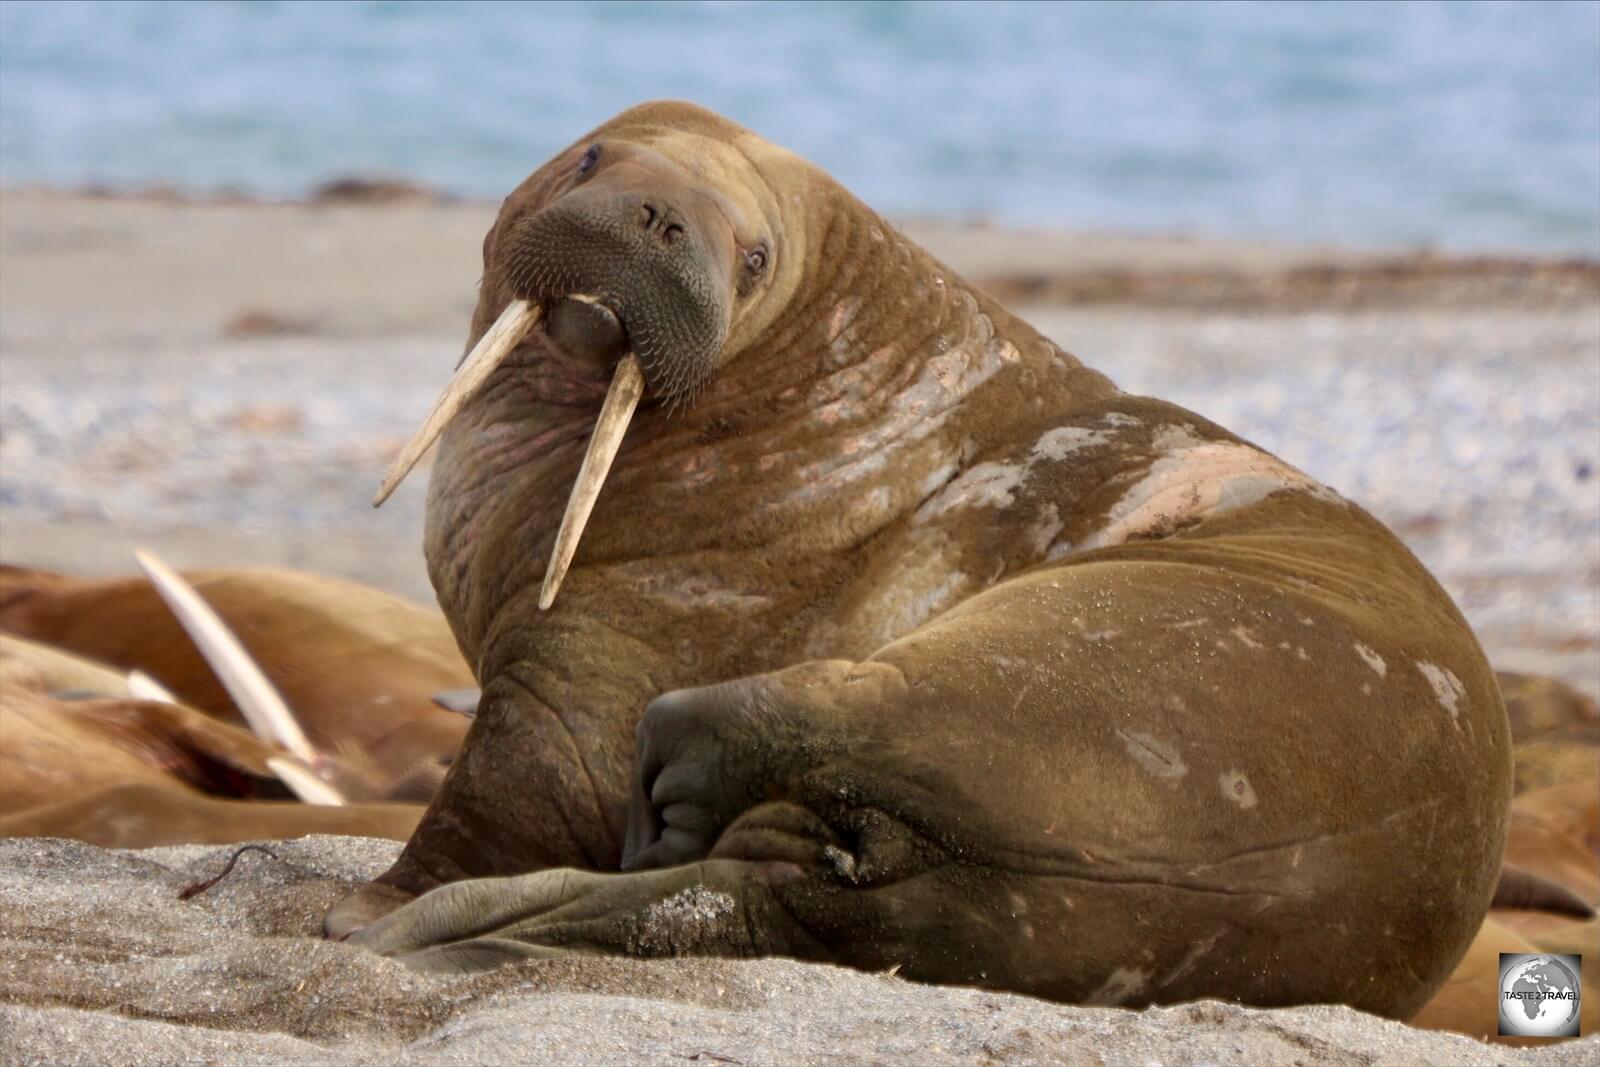 Walruses use their tusks to haul themselves out of the water onto the sea ice, and for defending themselves.